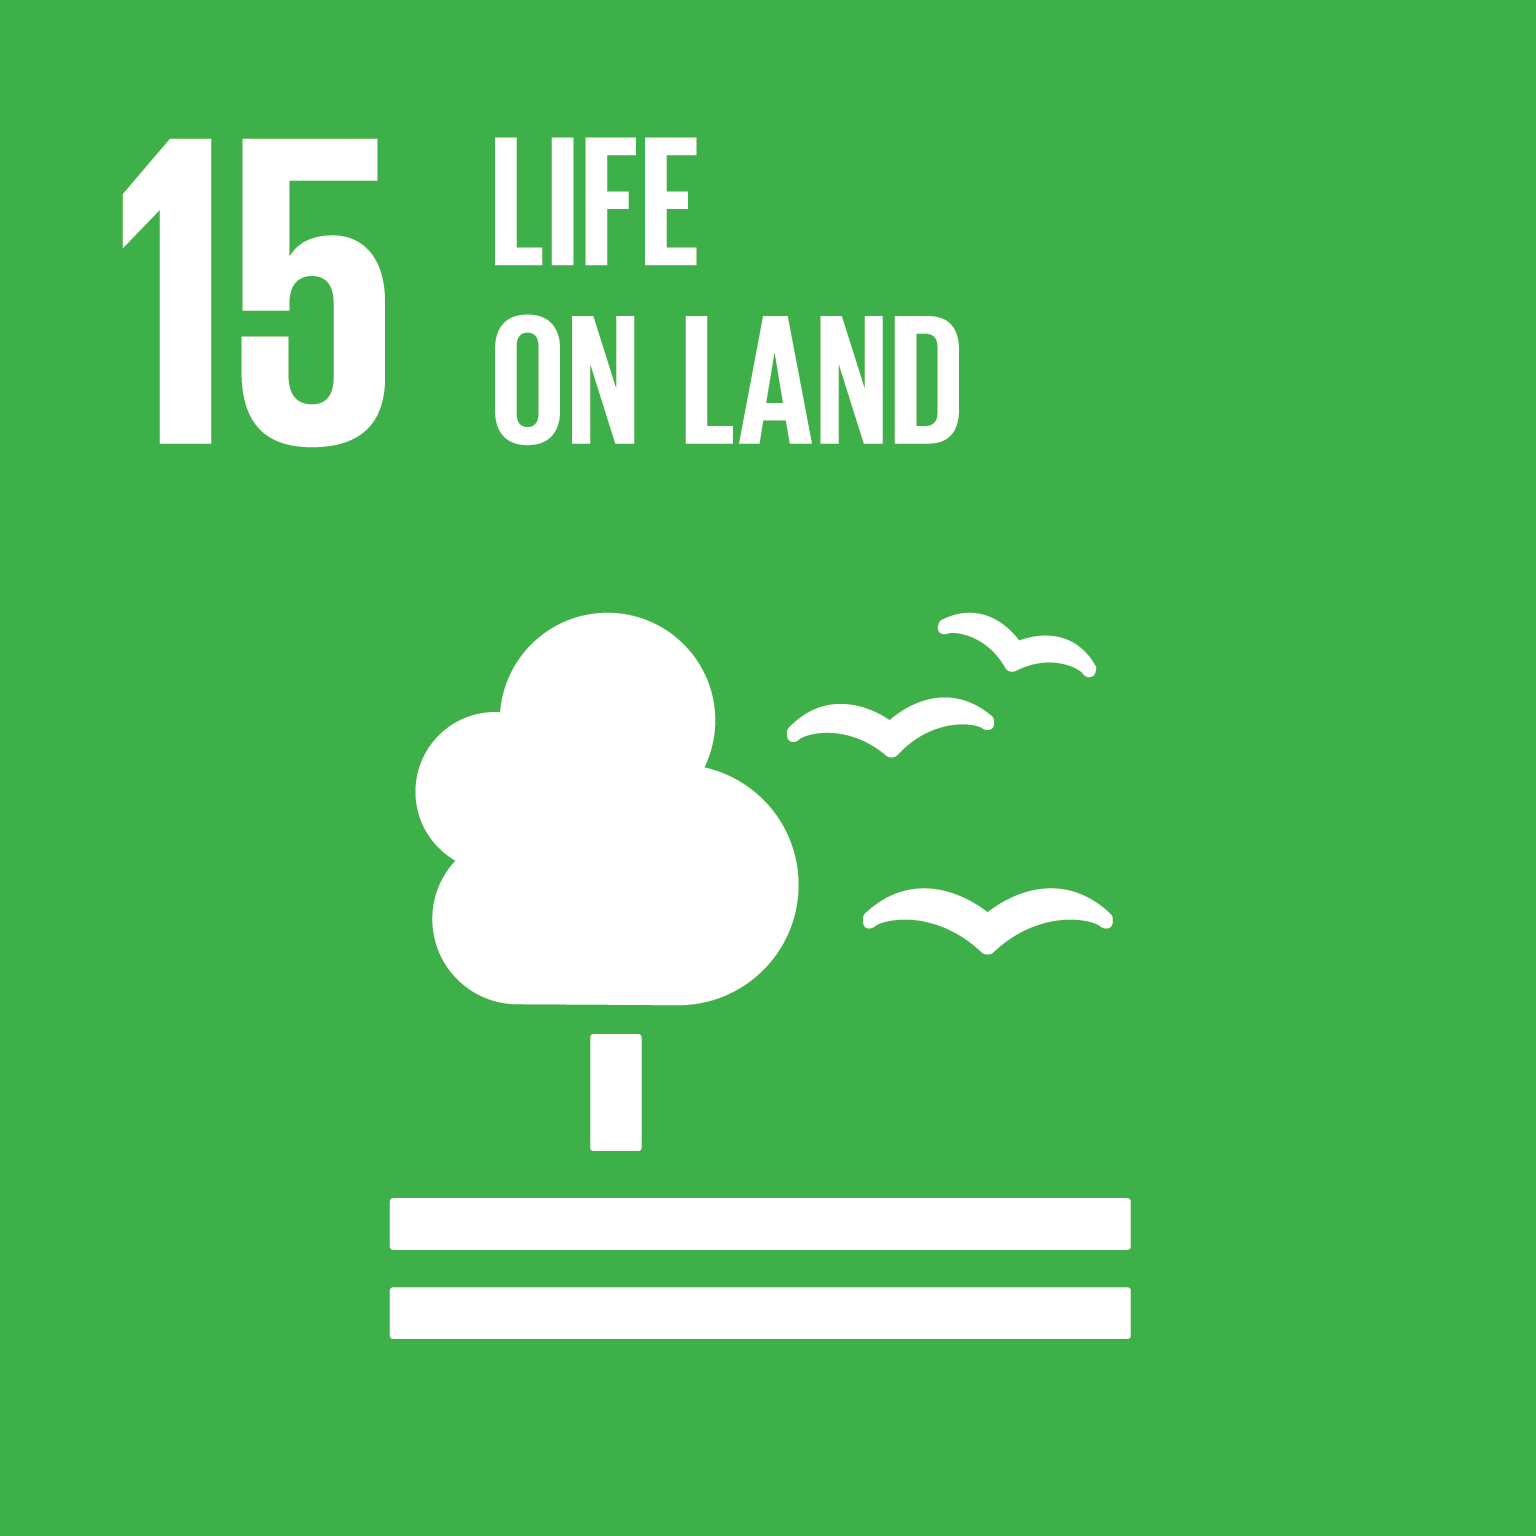 Goal 15: Life on Land, the text of this infographic is listed below